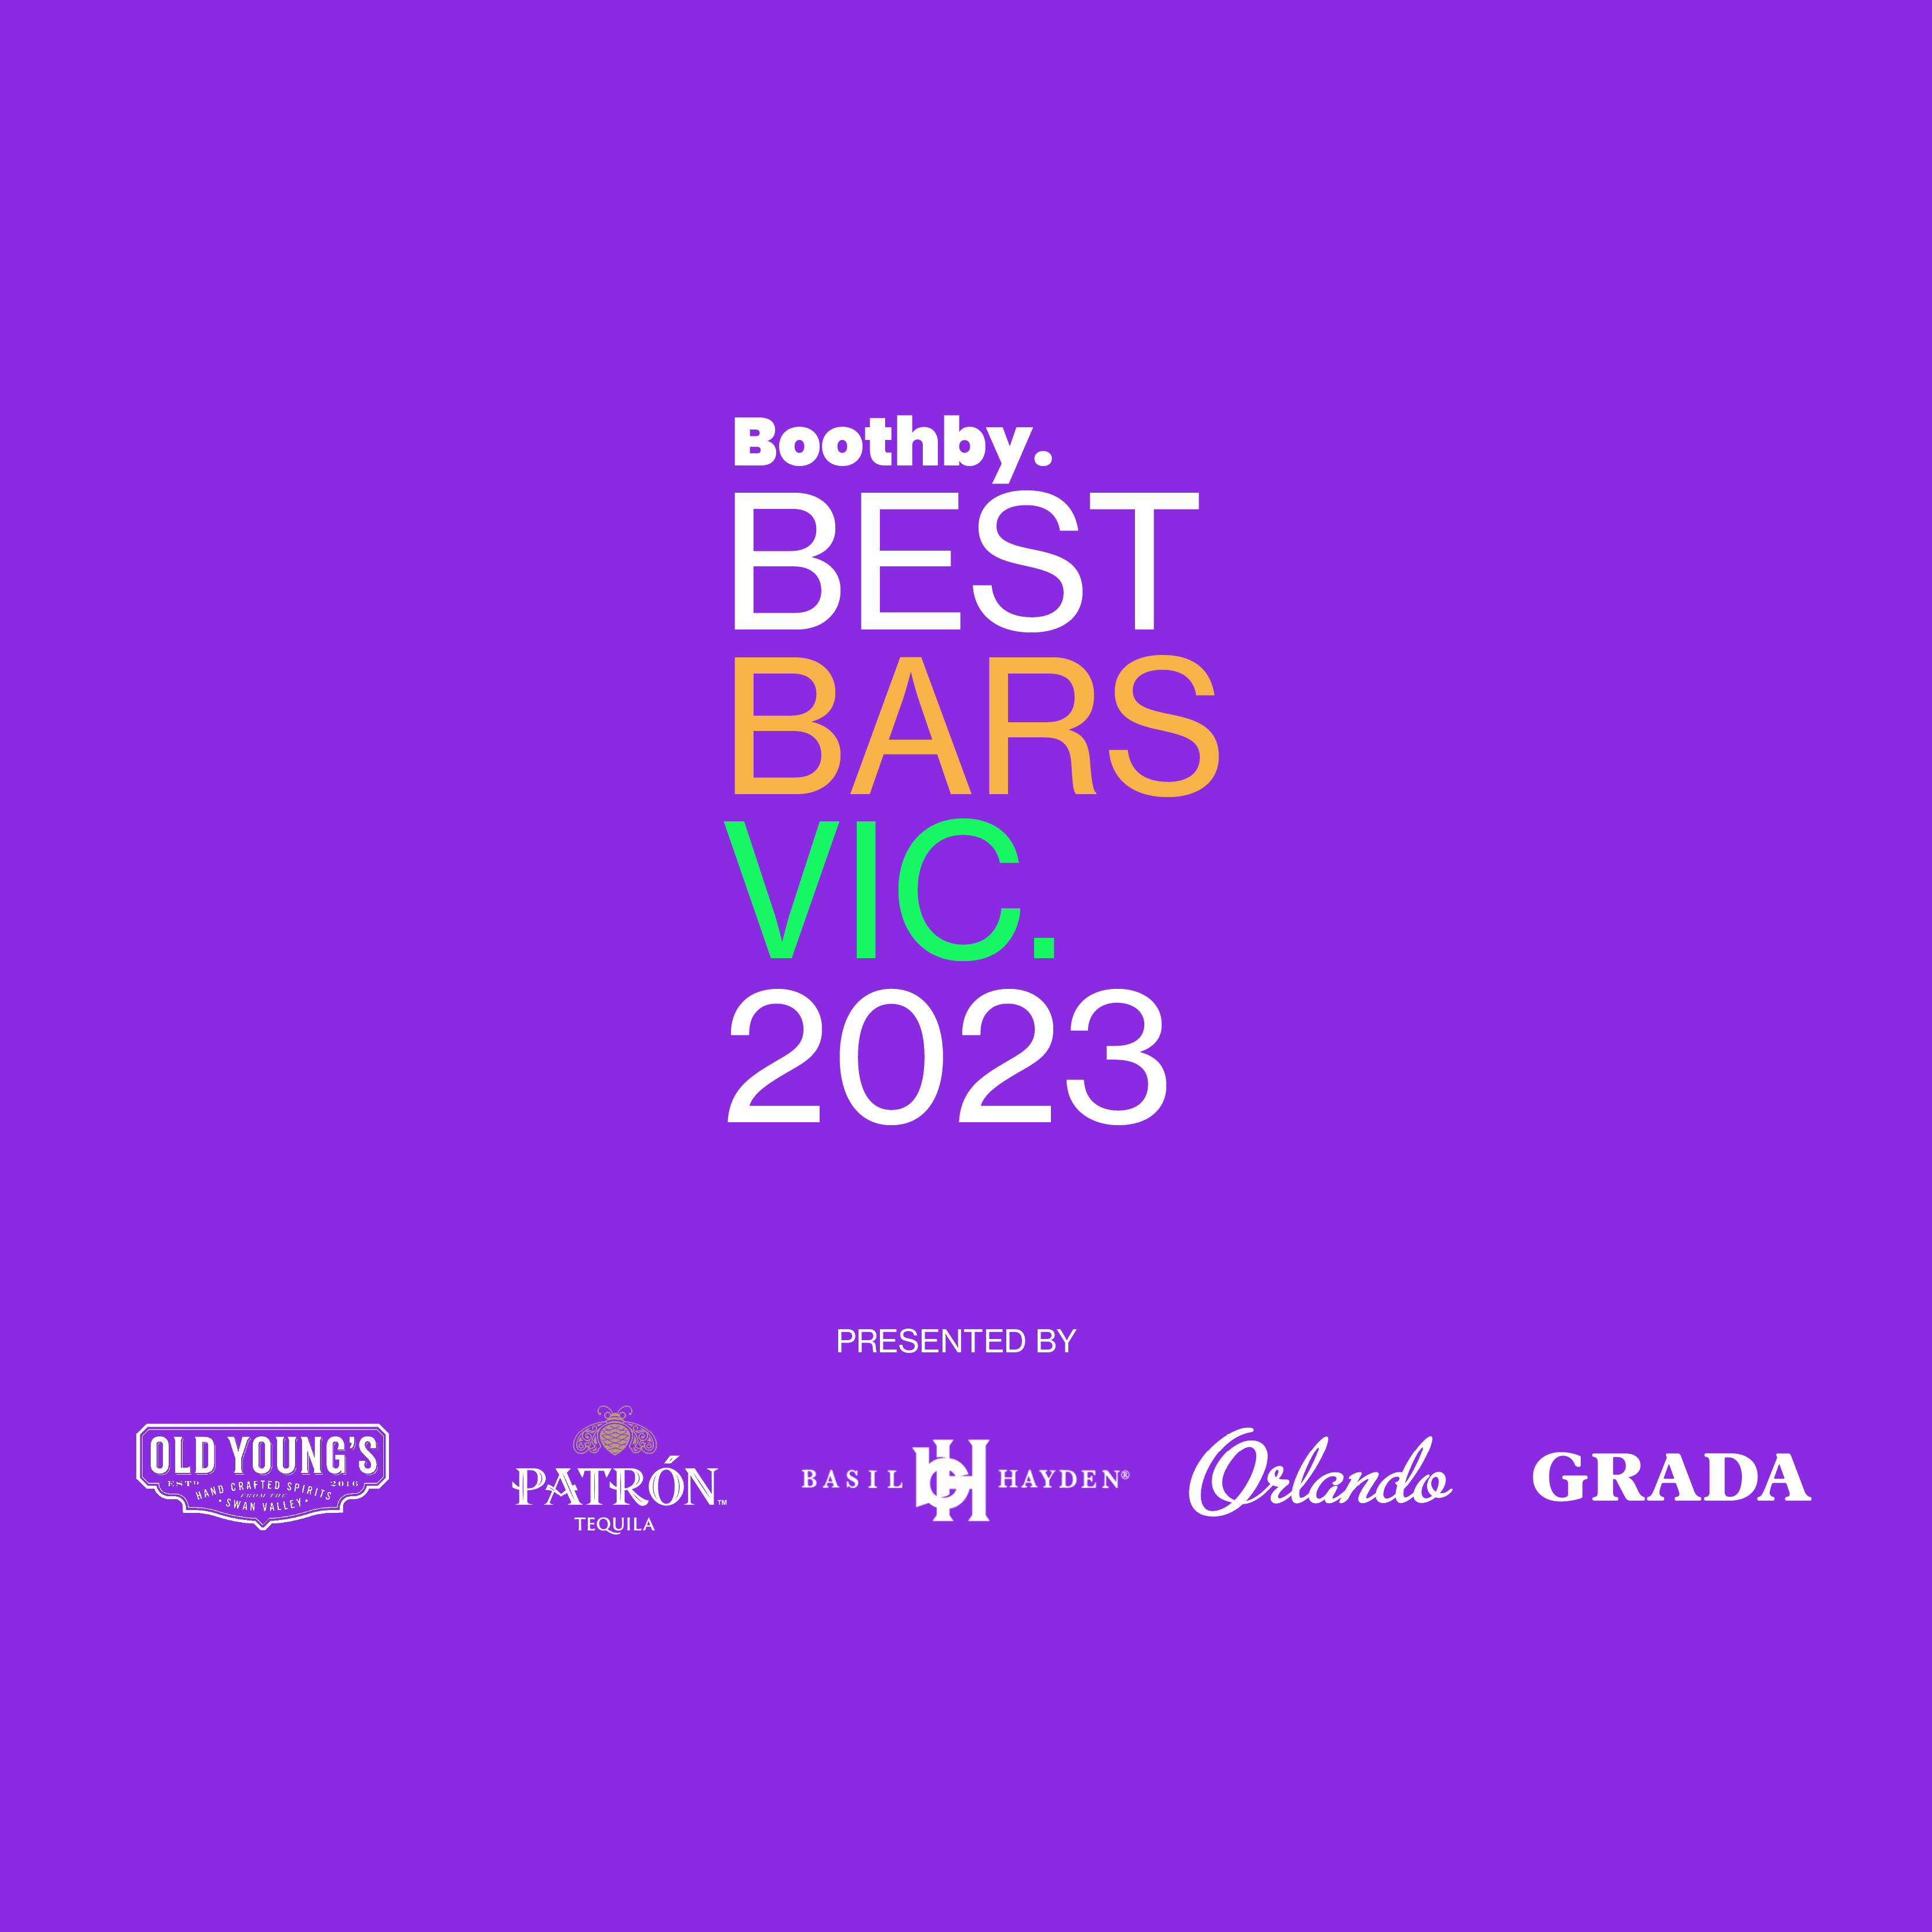 Nominations are now open in the Boothby Best Bars Awards VIC